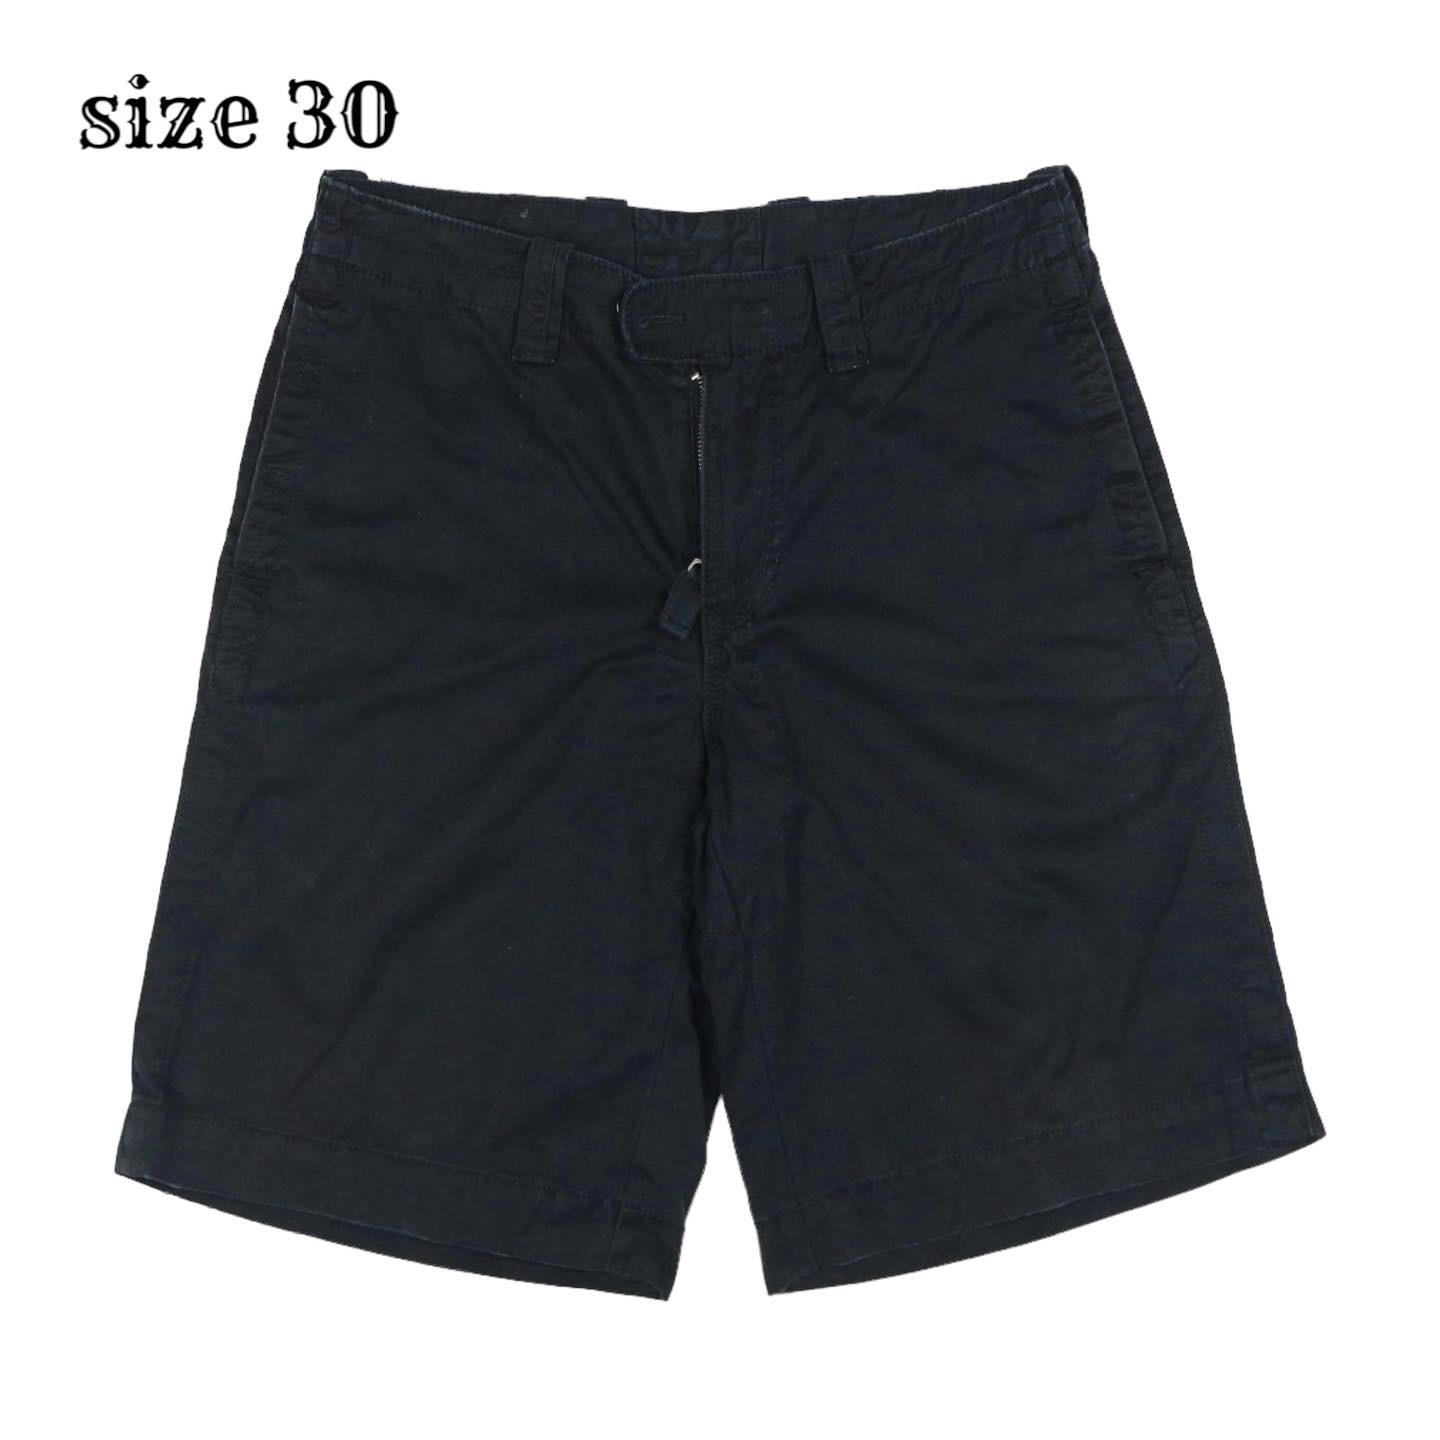 Polo by Ralph Lauren Shorts Size 30